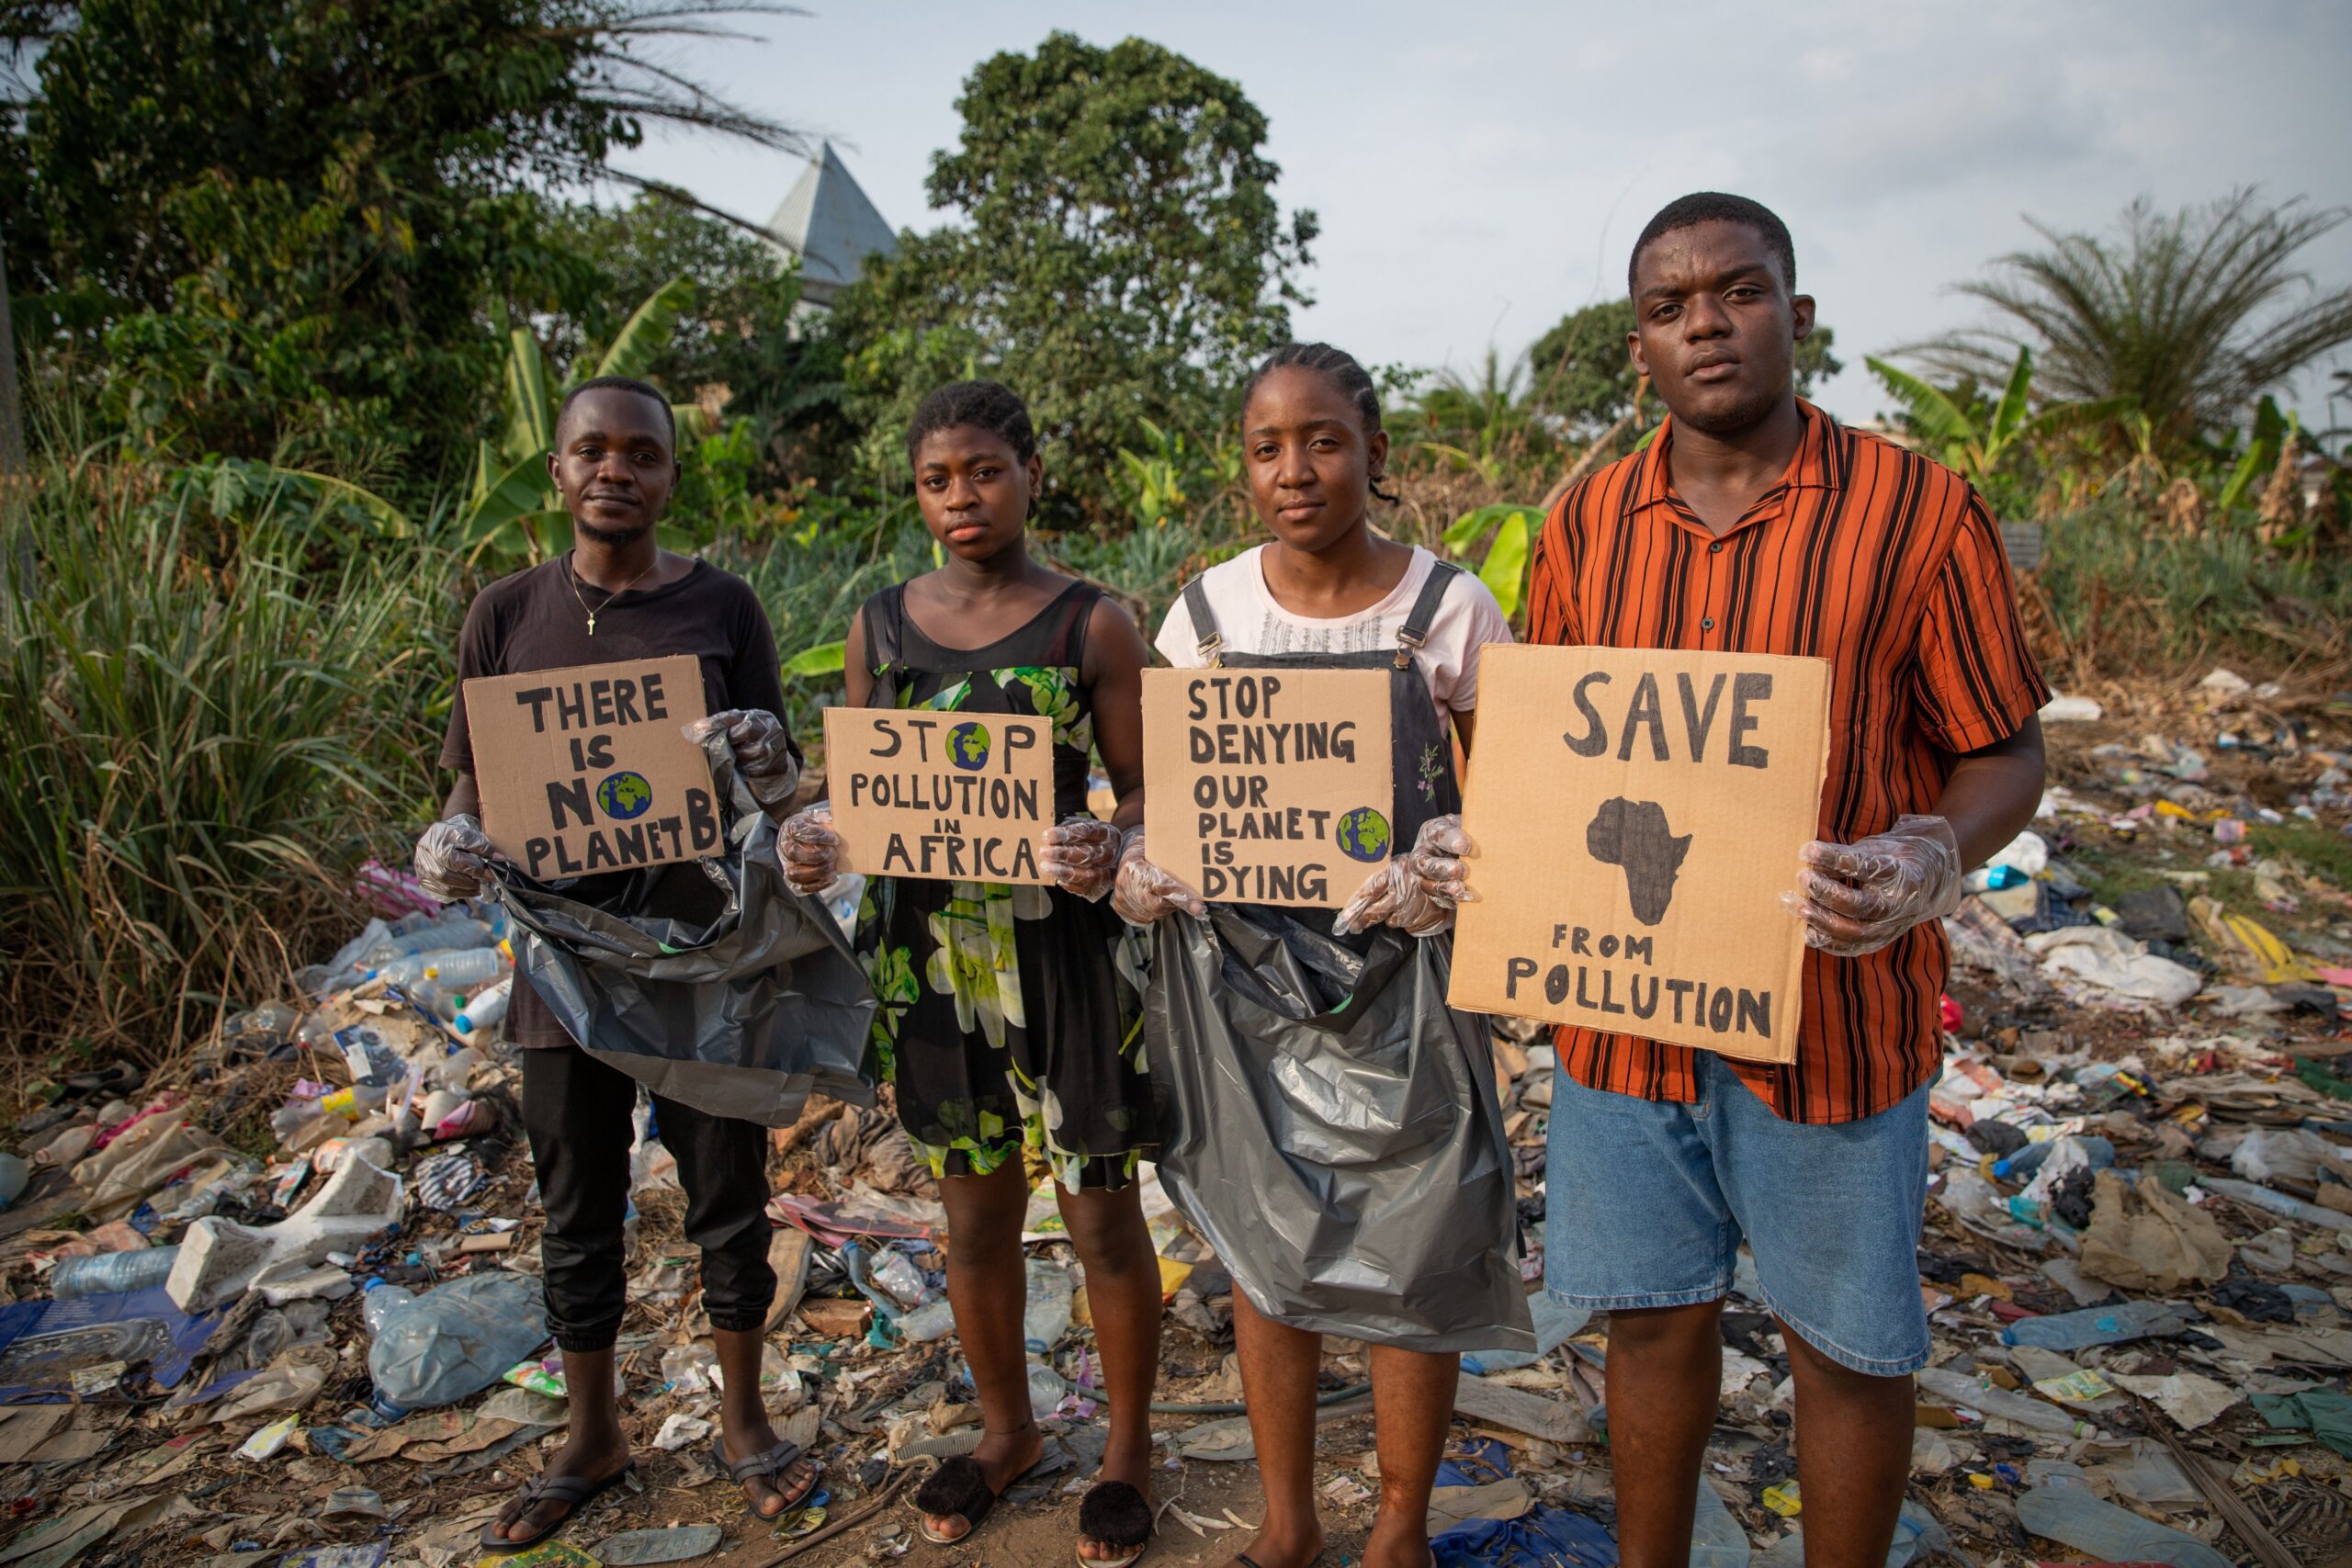 A group of young African activists protesting pollution